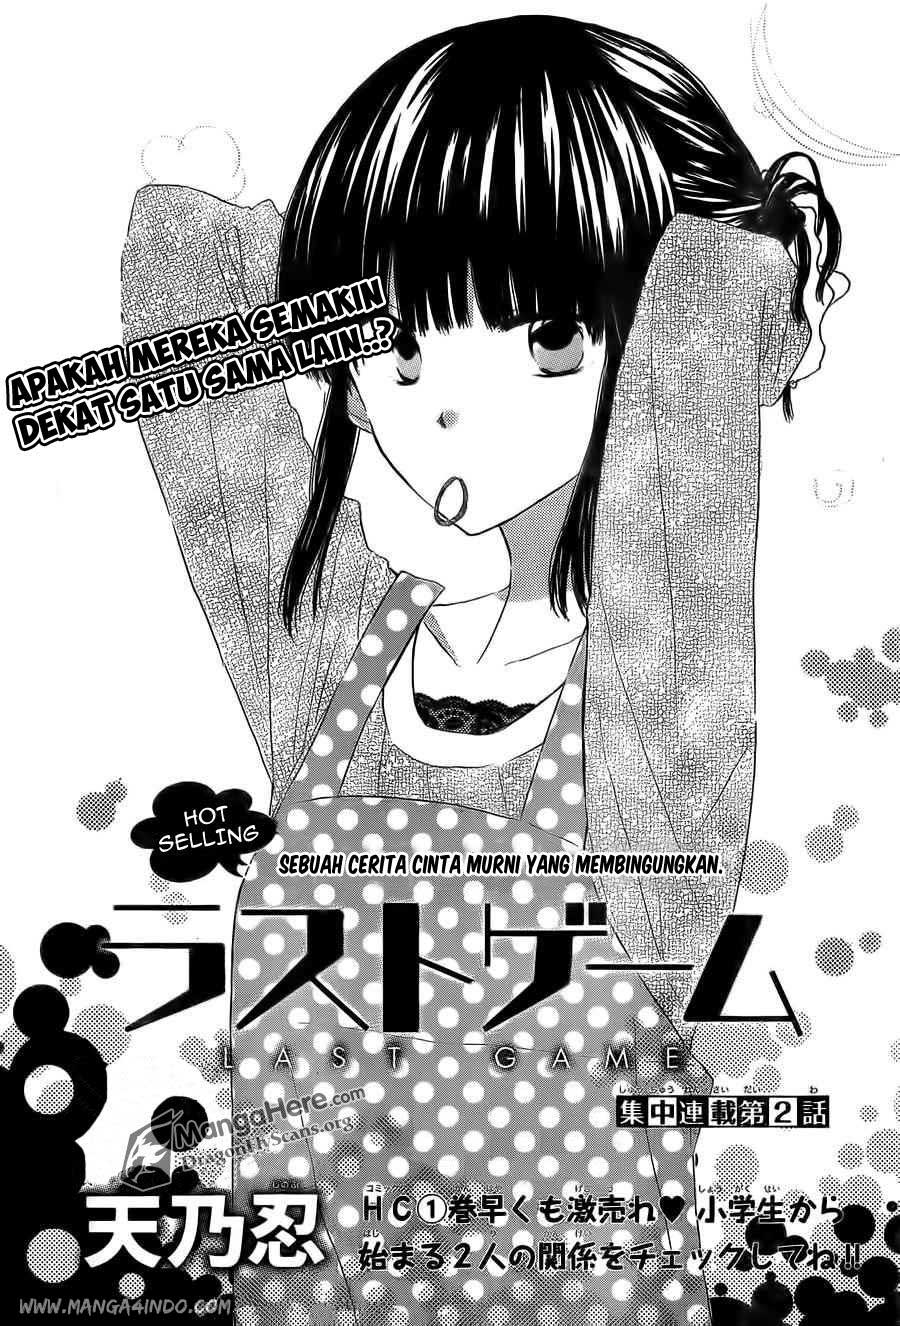 Last Game Chapter 05